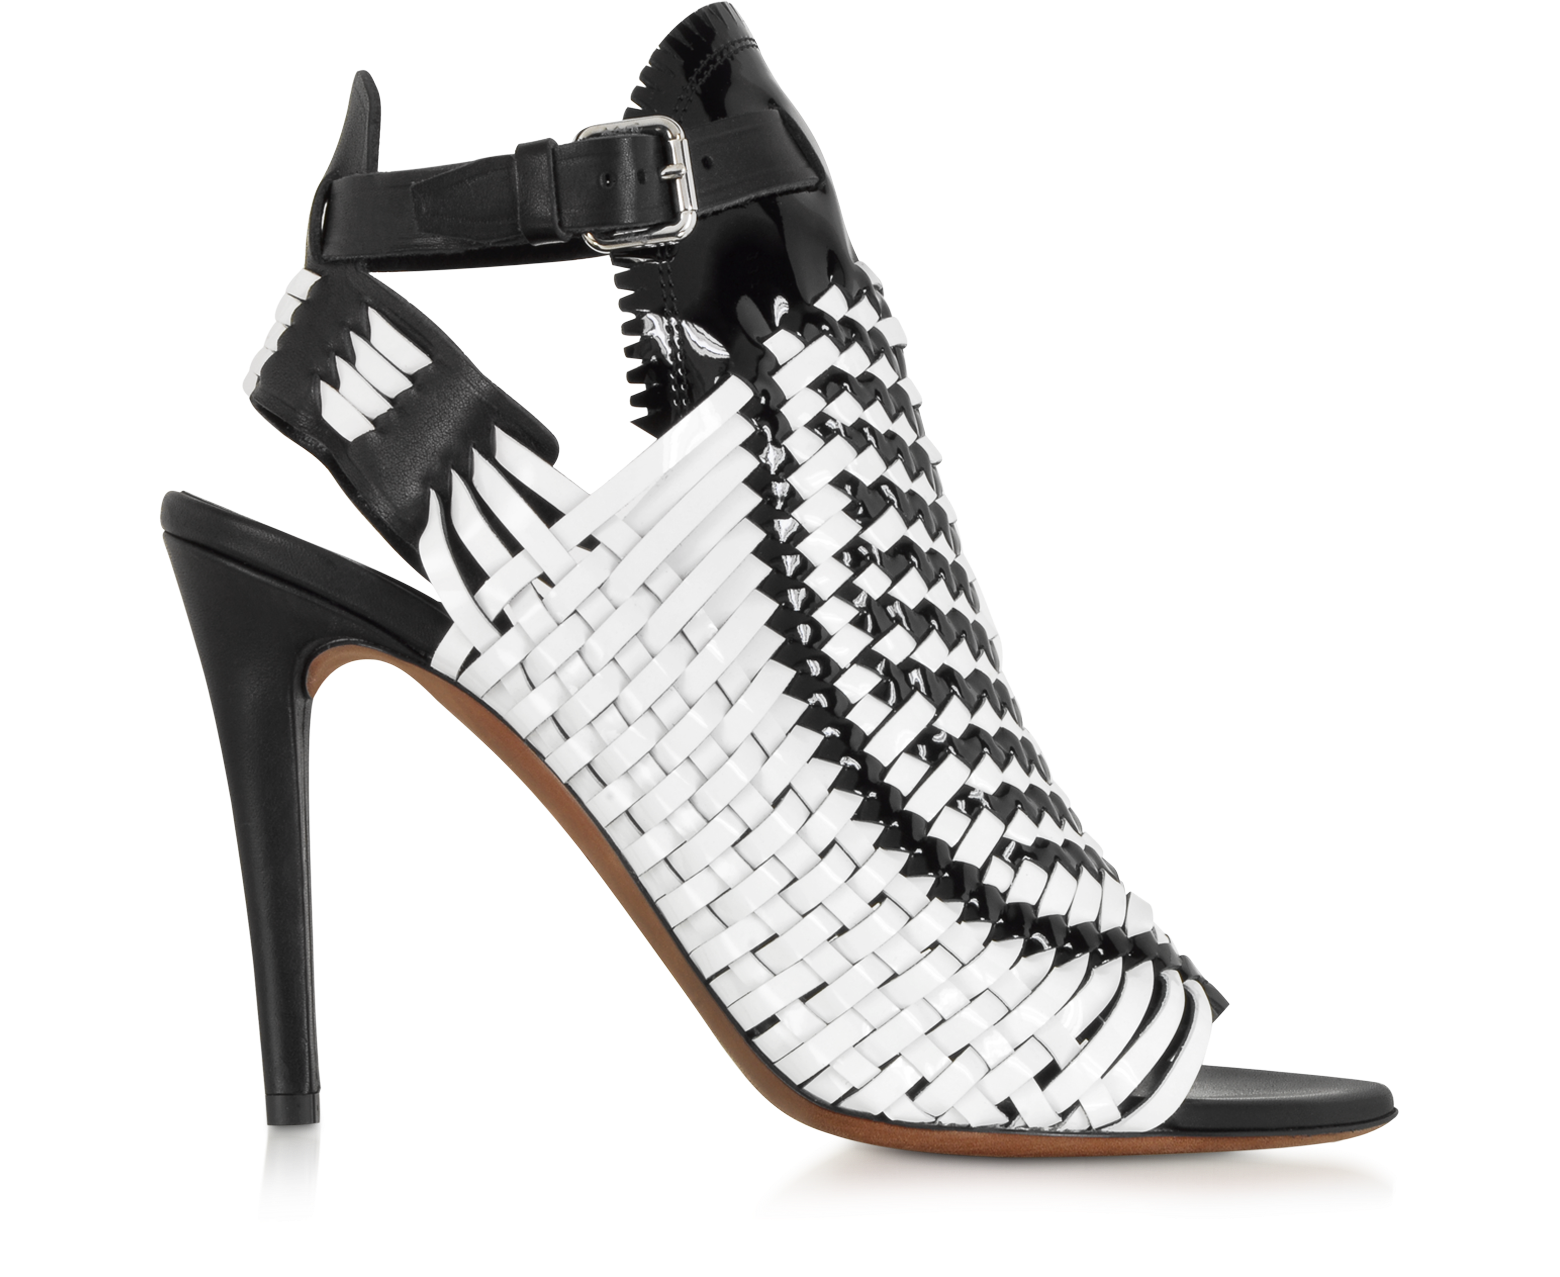 Proenza Schouler Black and White Woven Patent Leather Slingback Sandal ...